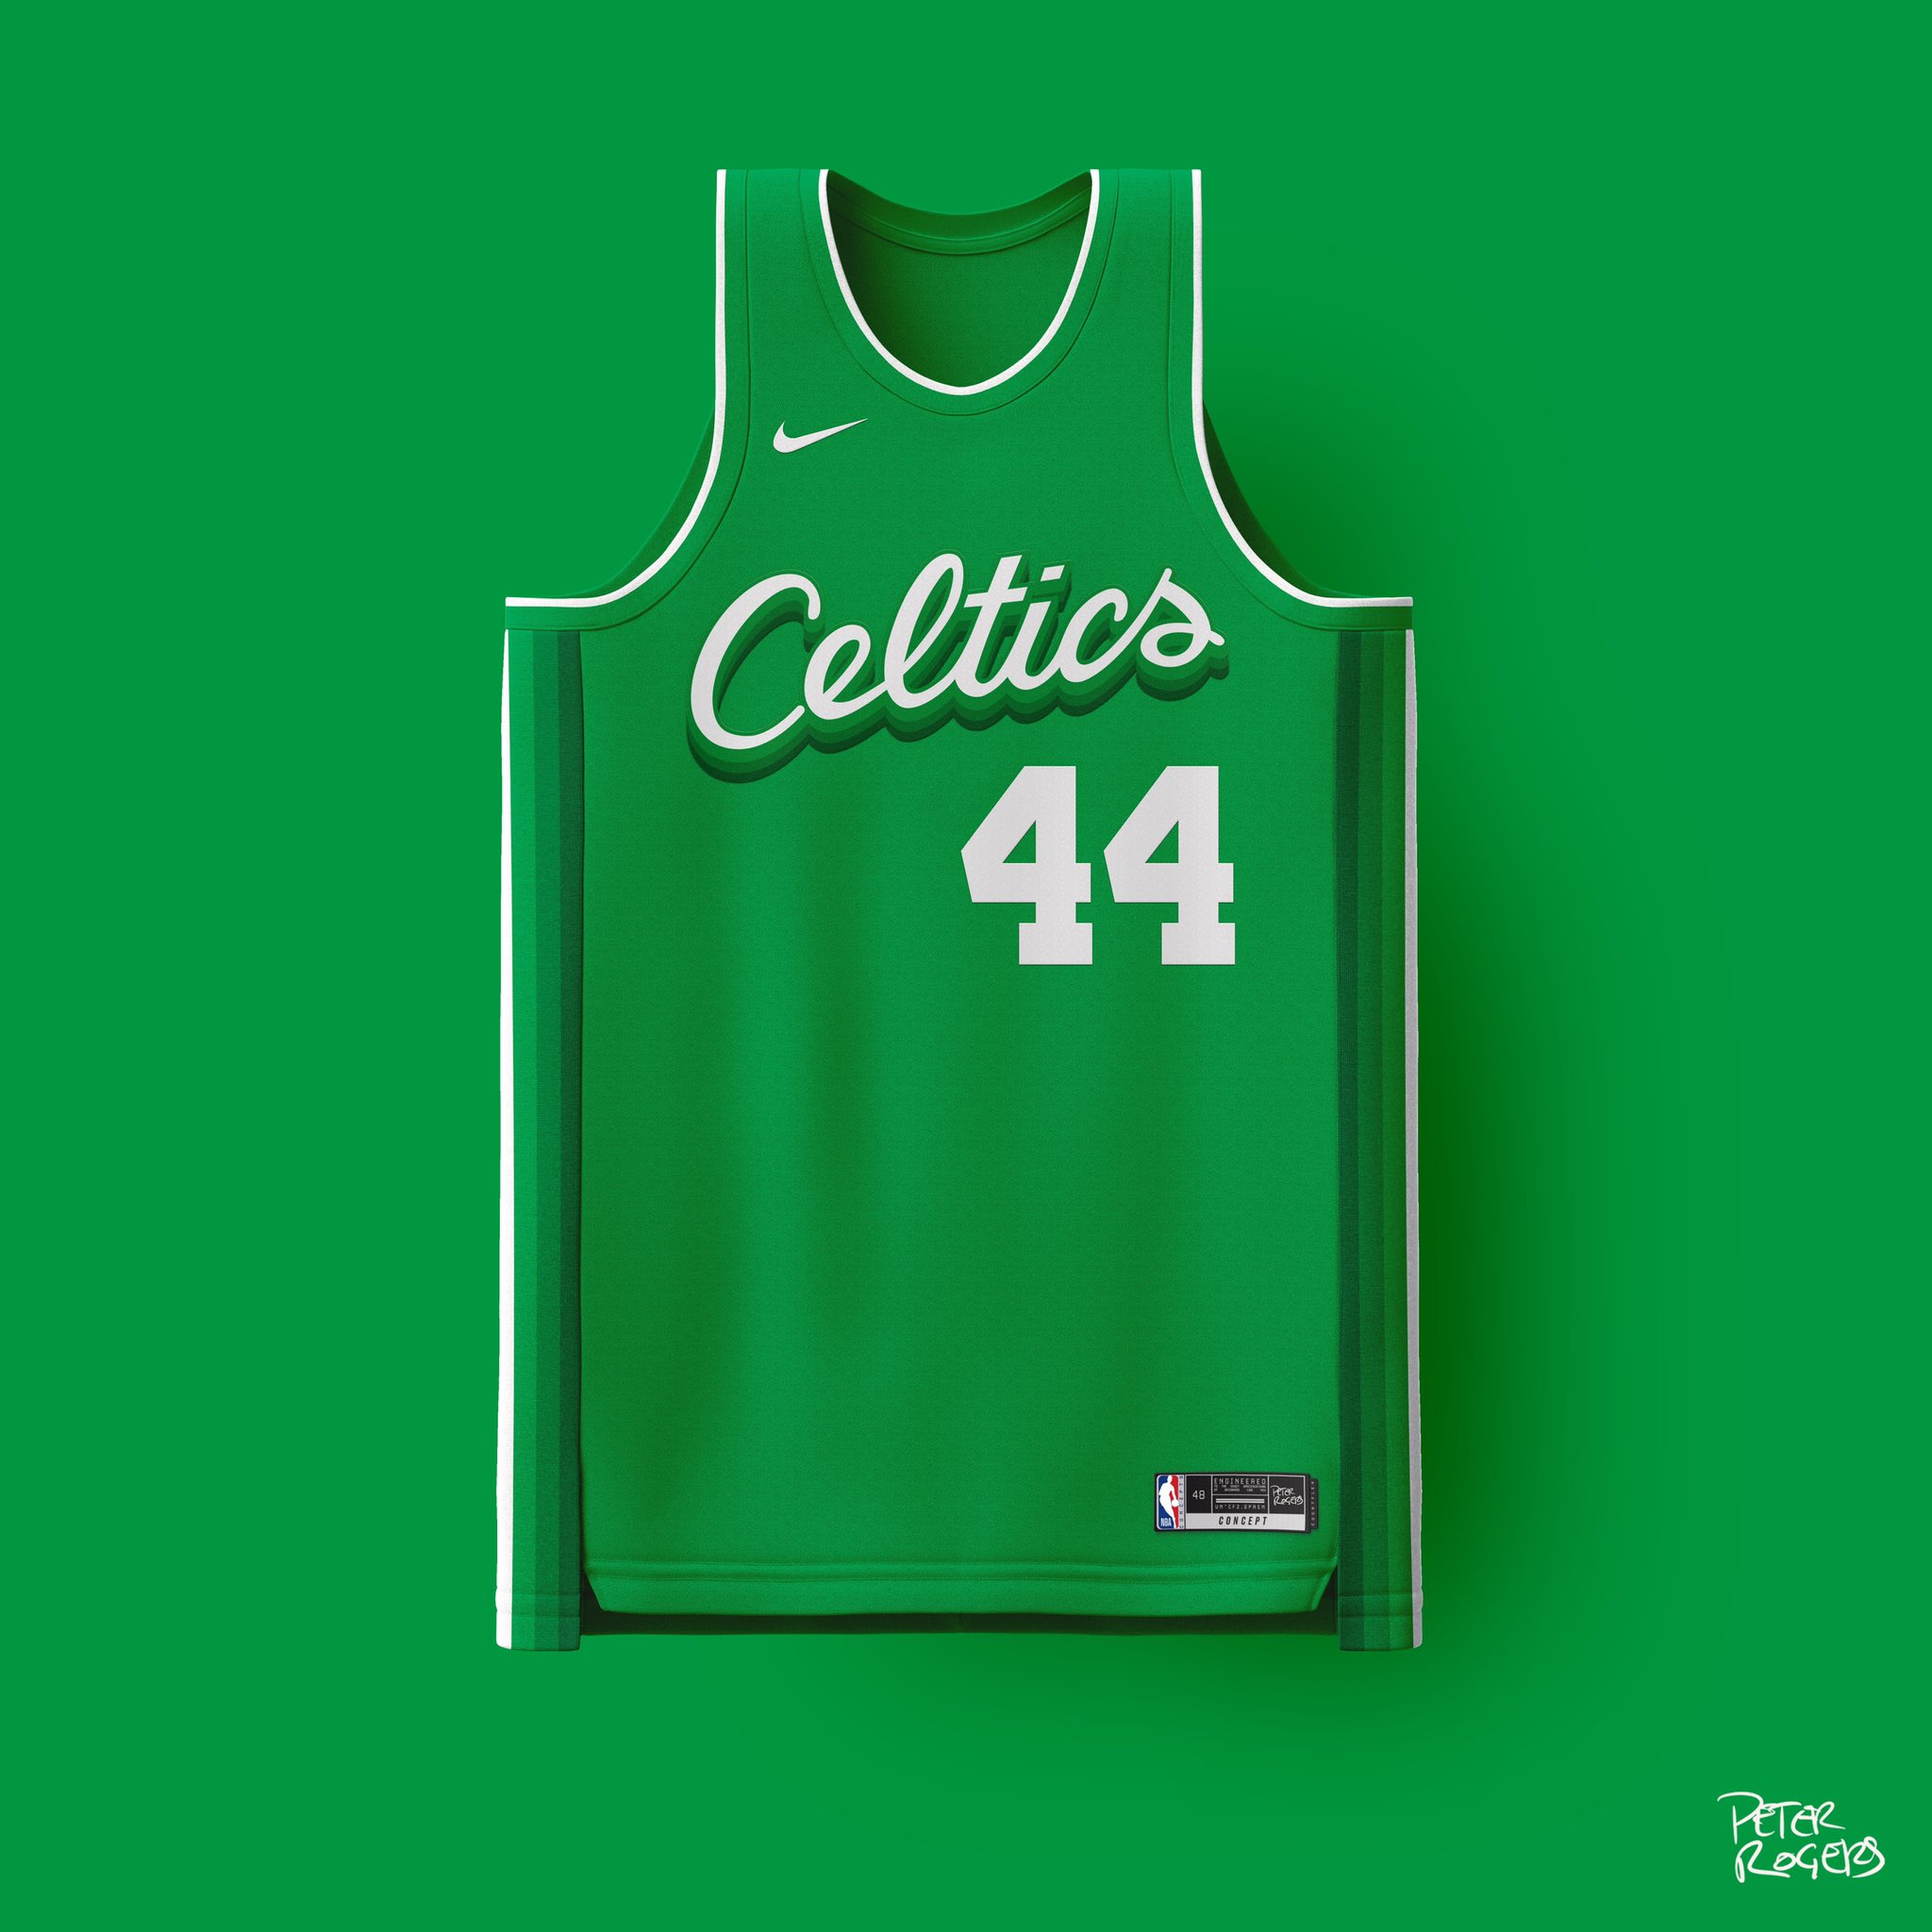 pete rogers, professional diaper changer on X: designing a new celtics  jersey after every win 🍀 record: 6-3  / X